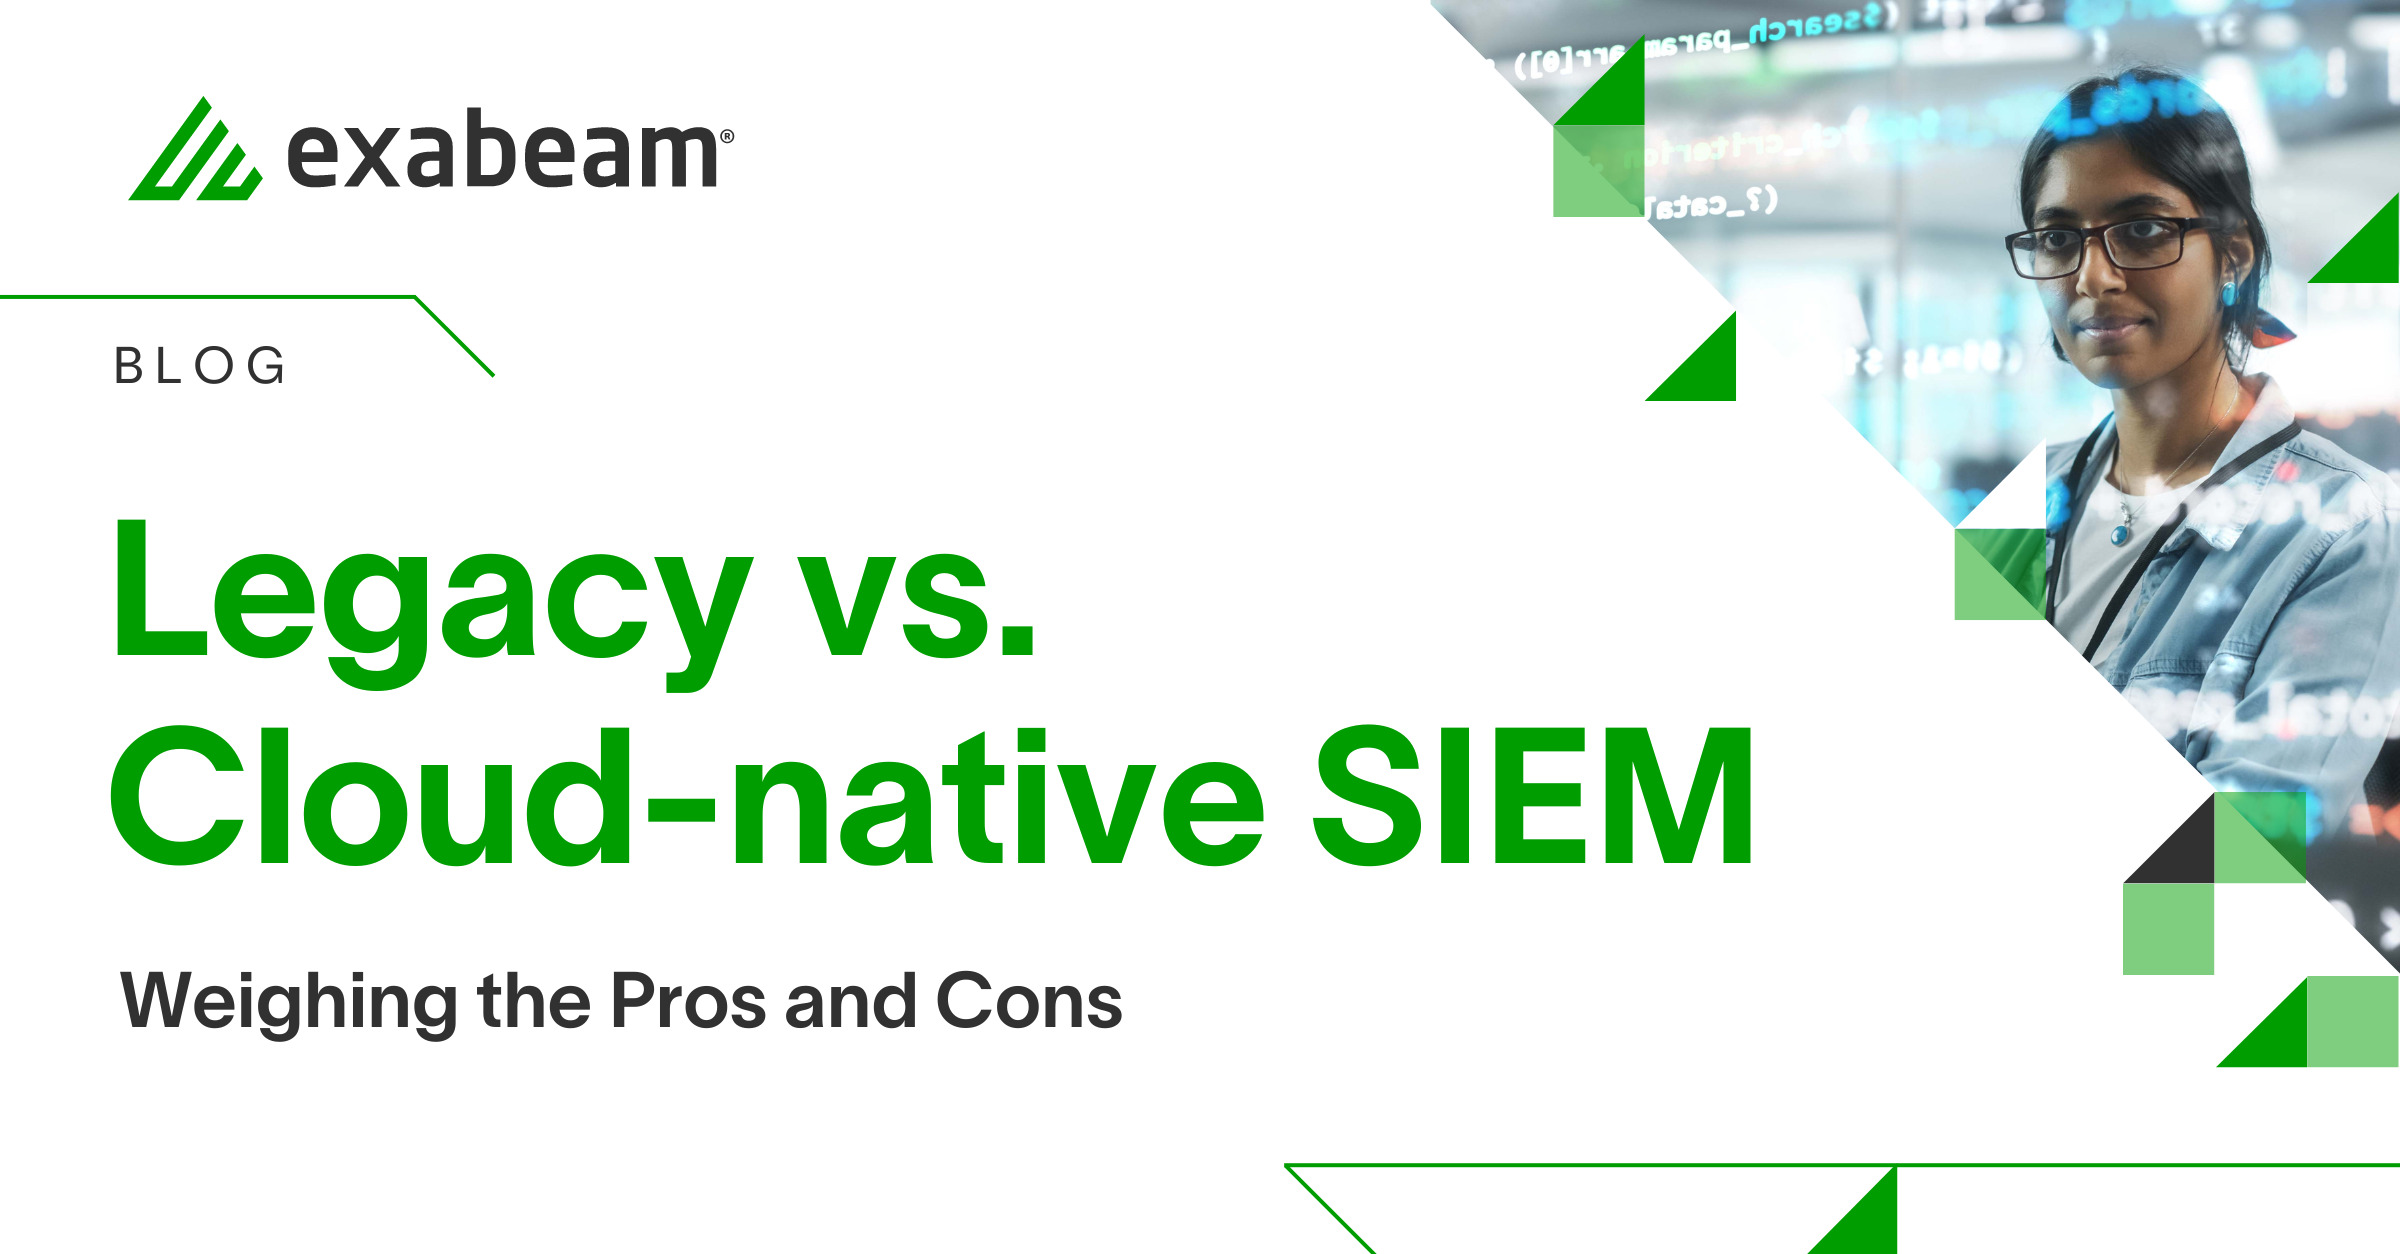 Legacy vs. Cloud-native SIEM: Weighing the Pros and Cons